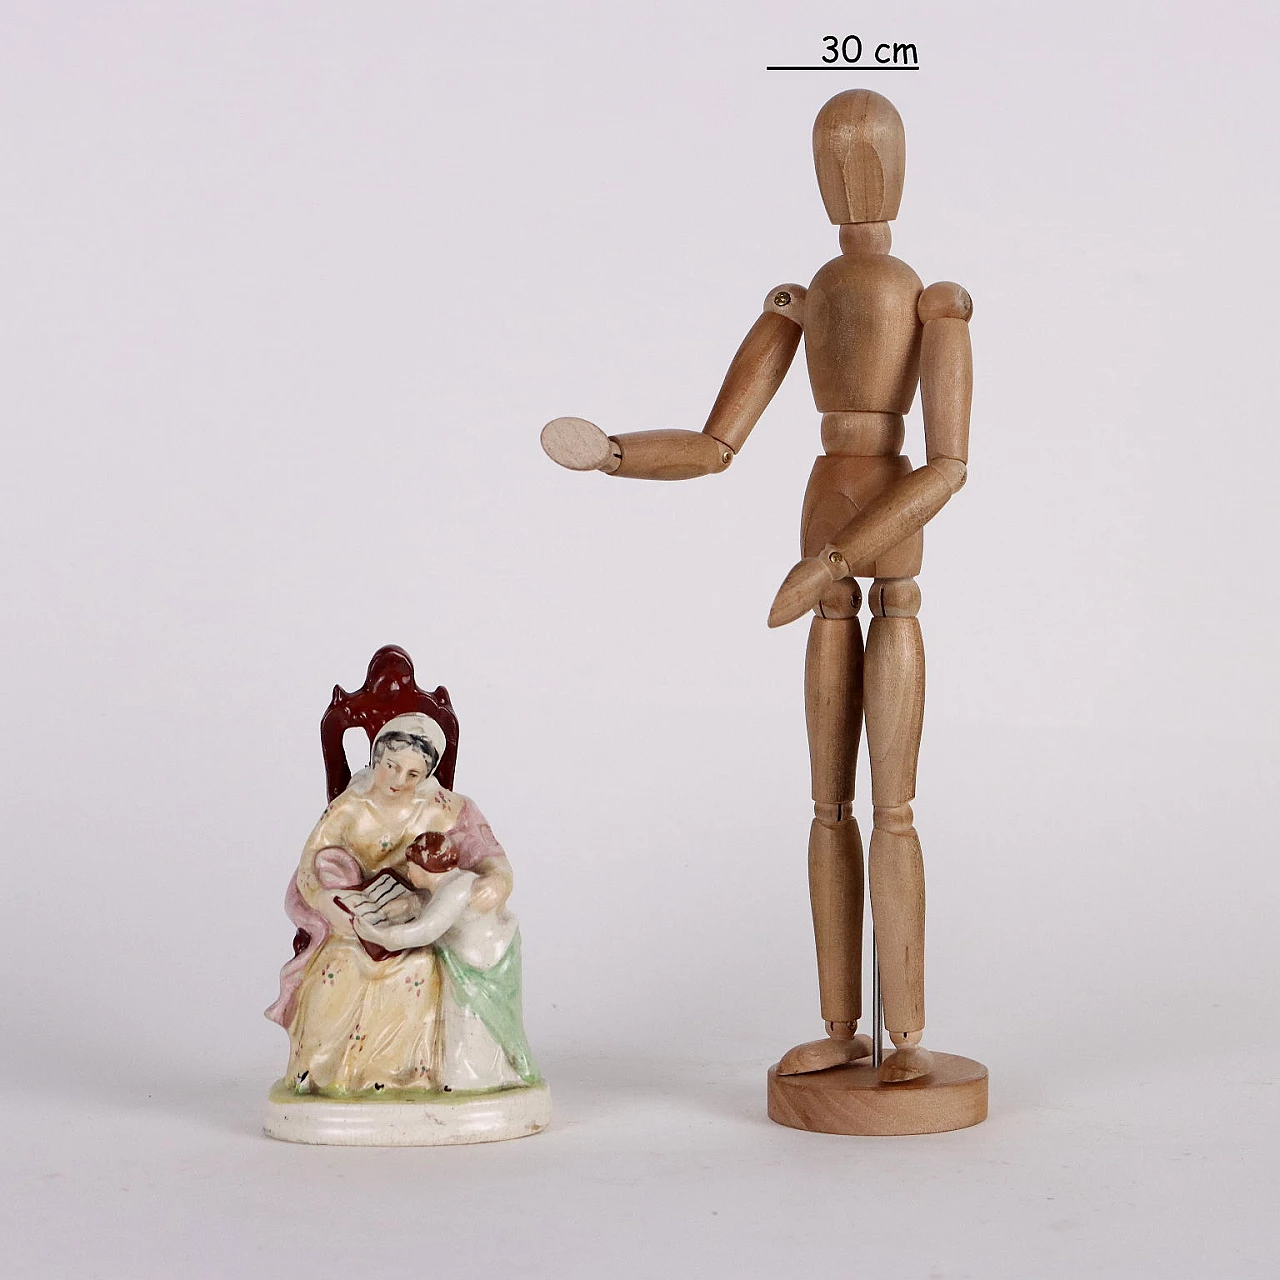 Woman and child, sculpture in Staffordshire porcelain, 19th century 2